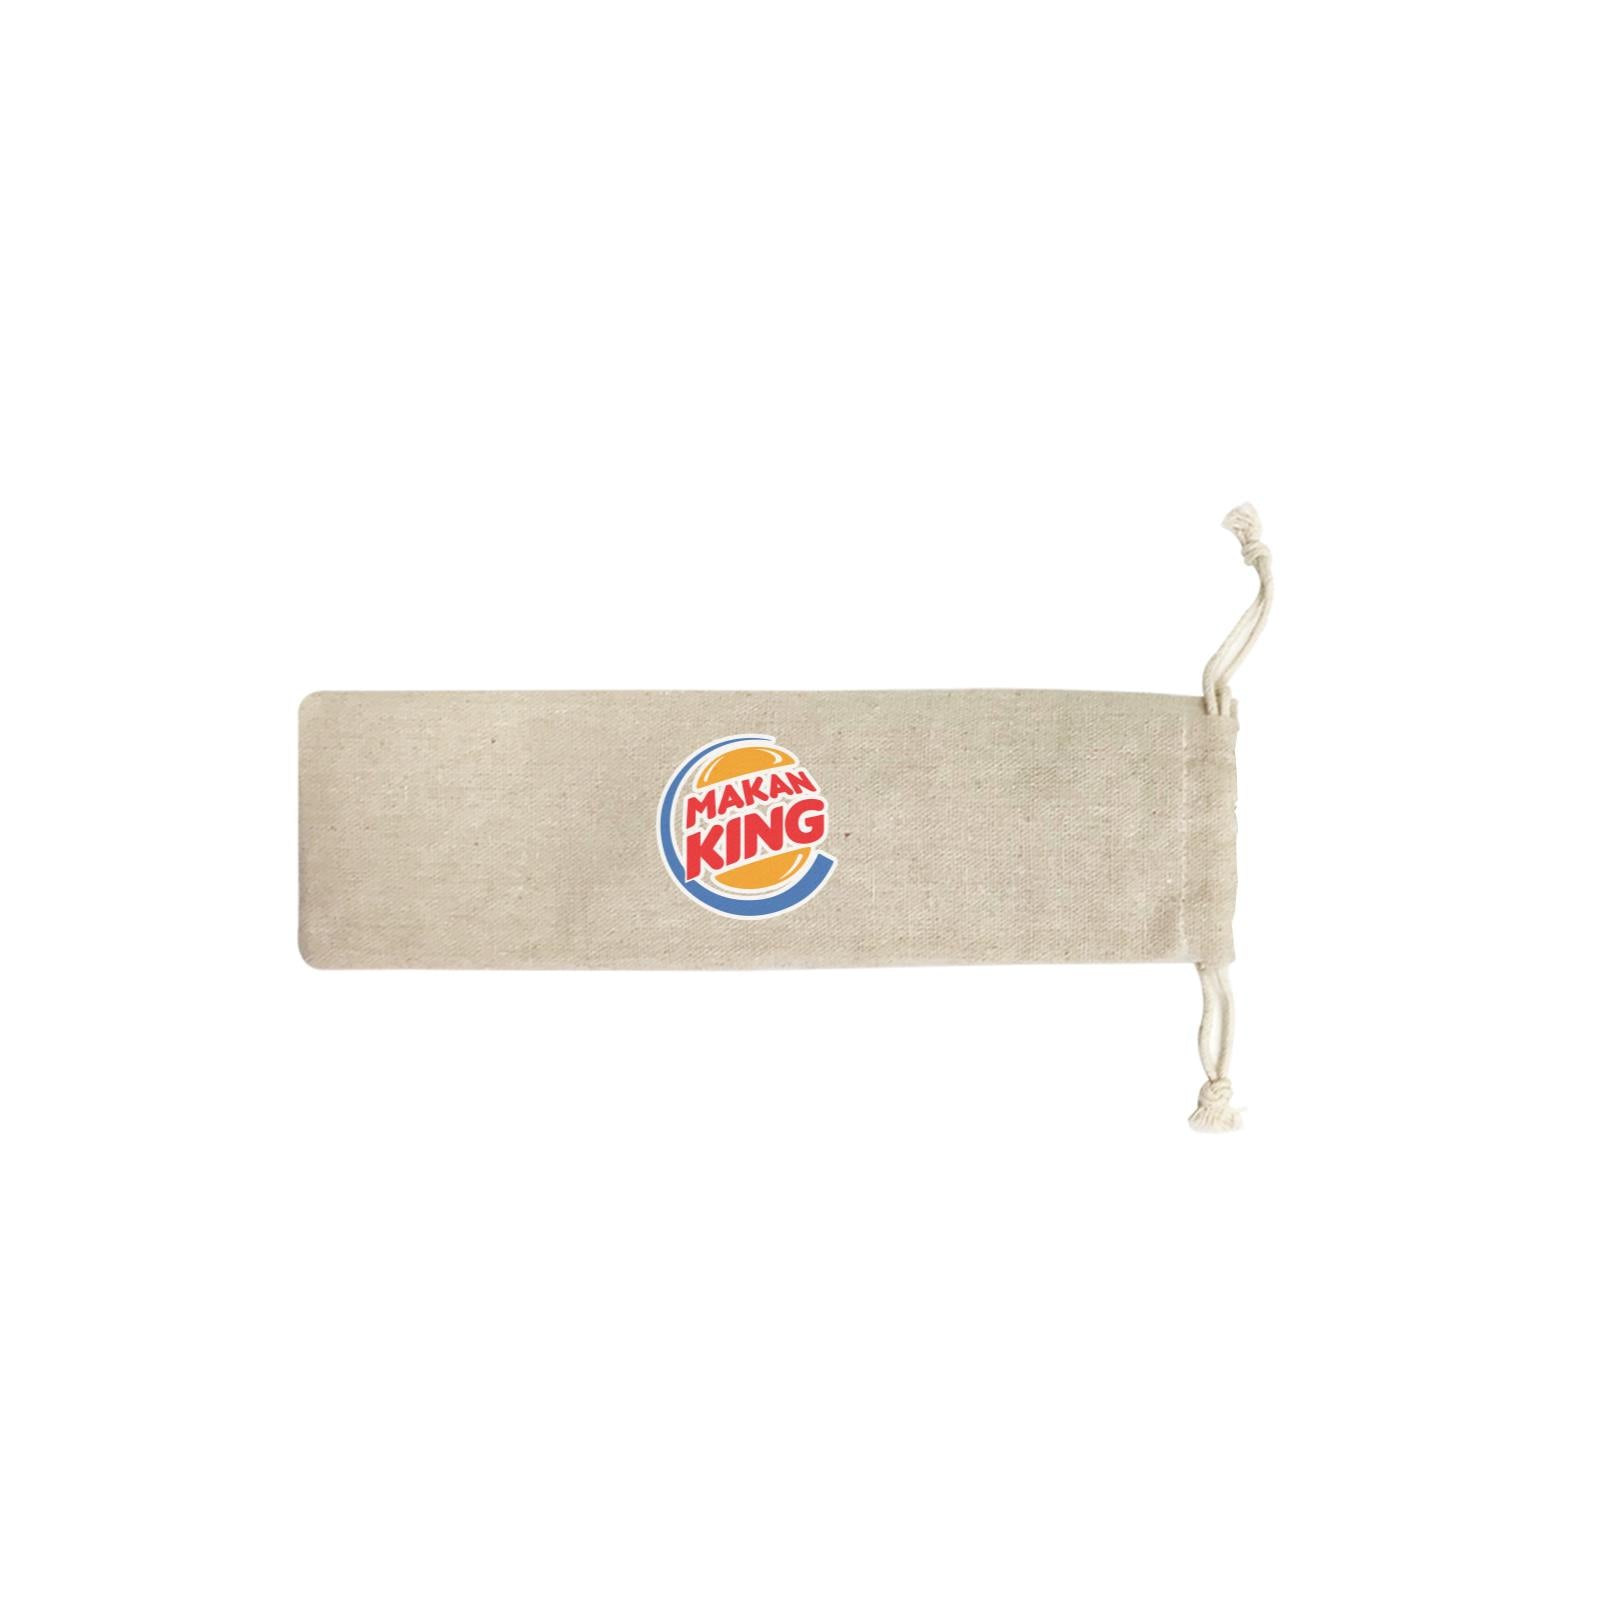 Slang Statement Makan King SB Straw Pouch (No Straws included)